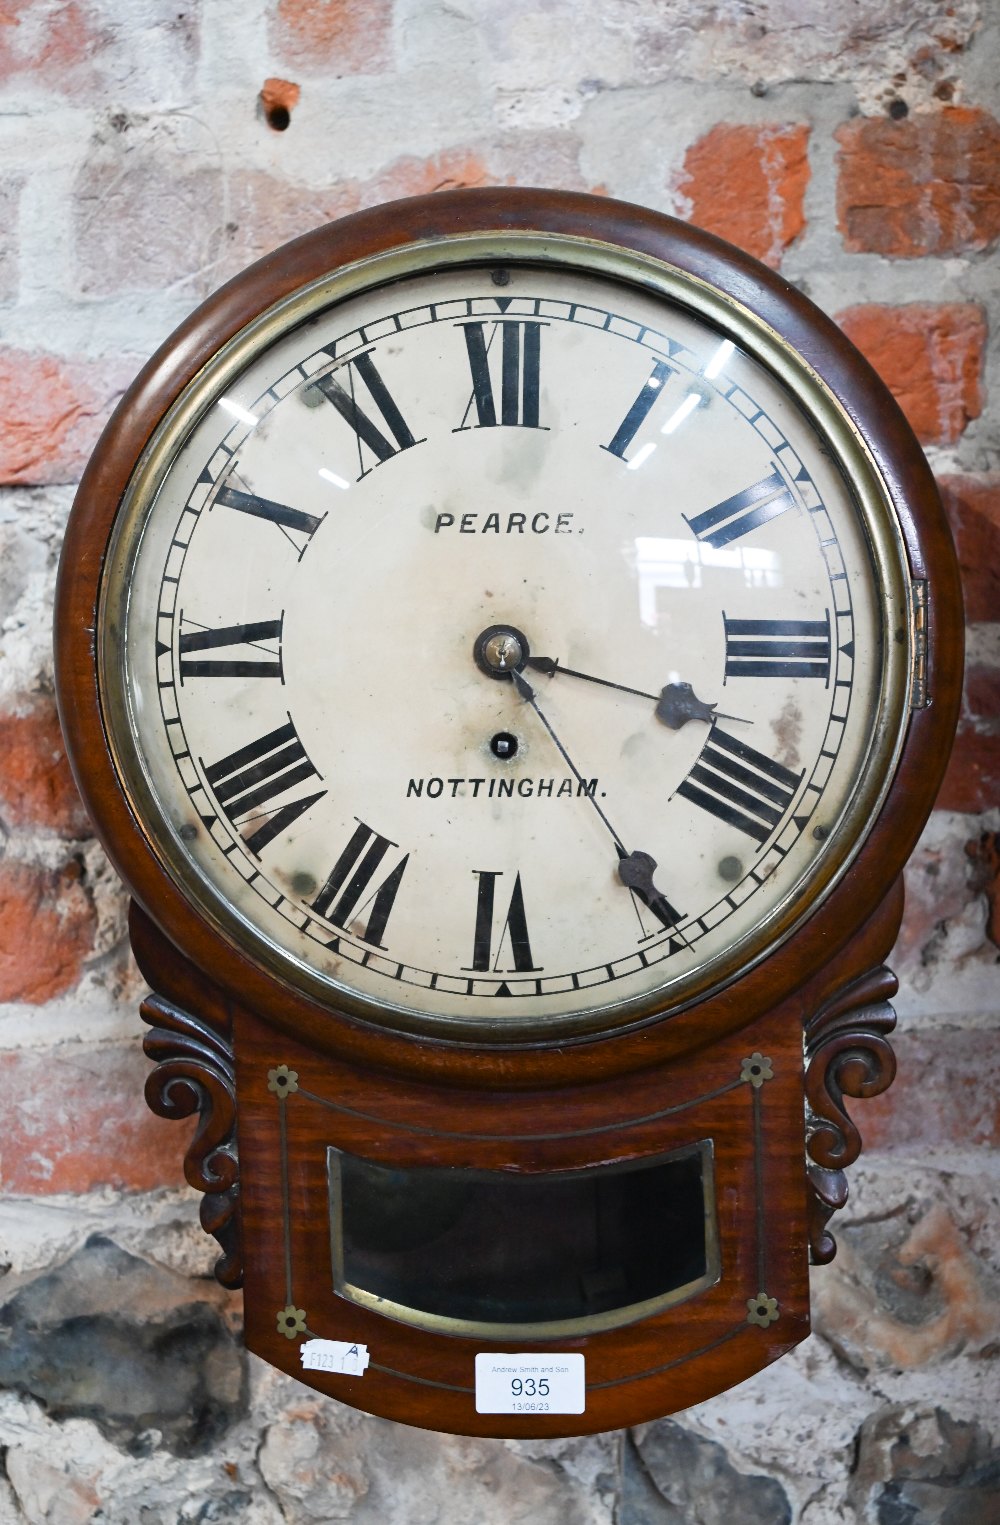 WITHDRAWN Pearce, Nottingham, a 19th century brass inlaid mahogany cased drop dial wall clock